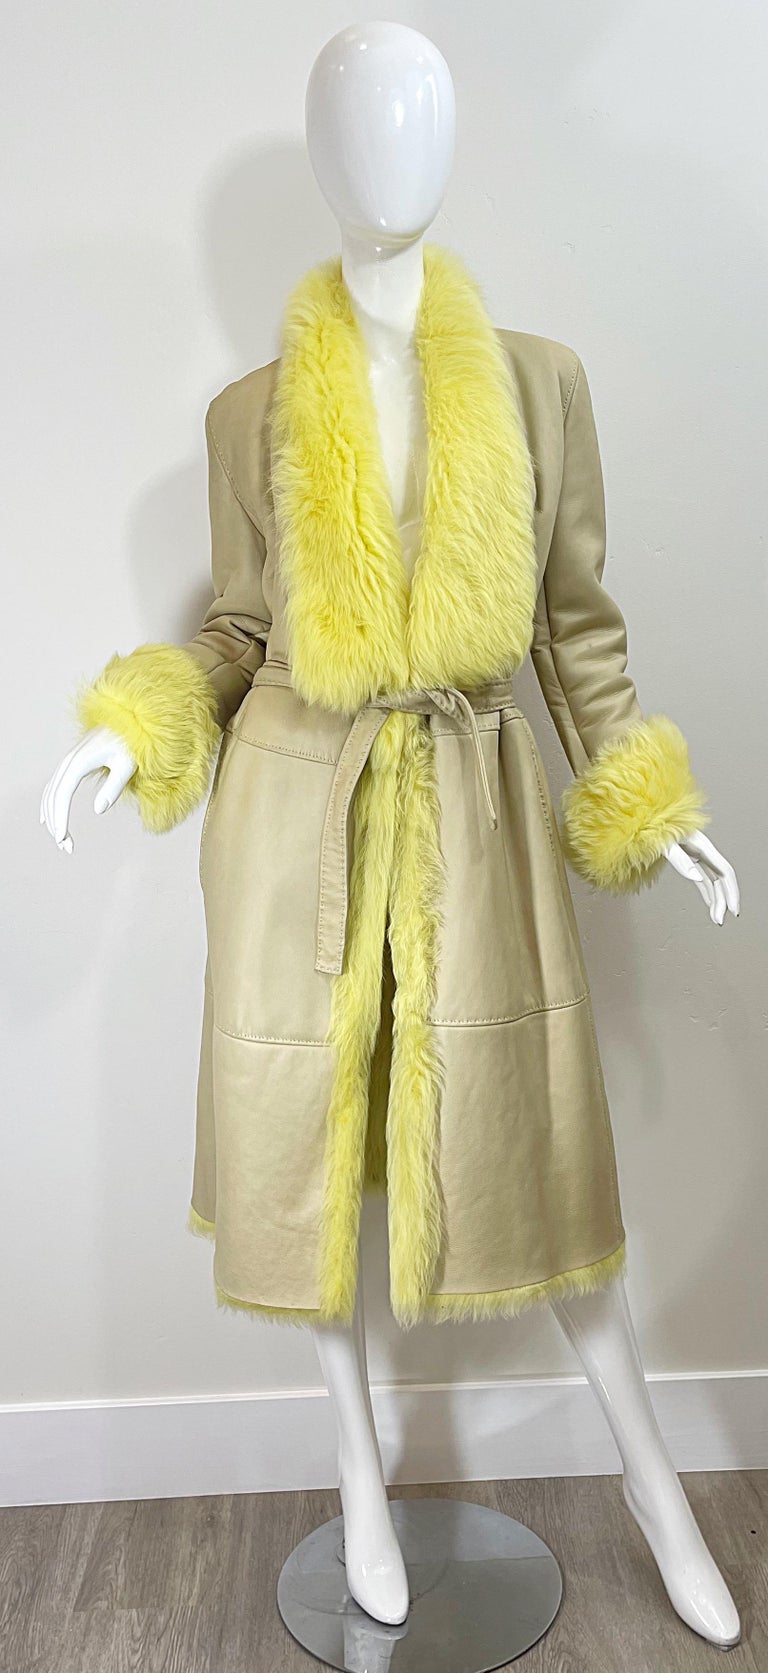 Chic and collectible 1990s GIANNI VERSACE tan leather and bright yellow shearling fur trench jacket ! Features the finest buttery soft leather. FULLY LINED in warm yellow shearling. Matching detachable belt. Pockets at each side of the hips. 1990s